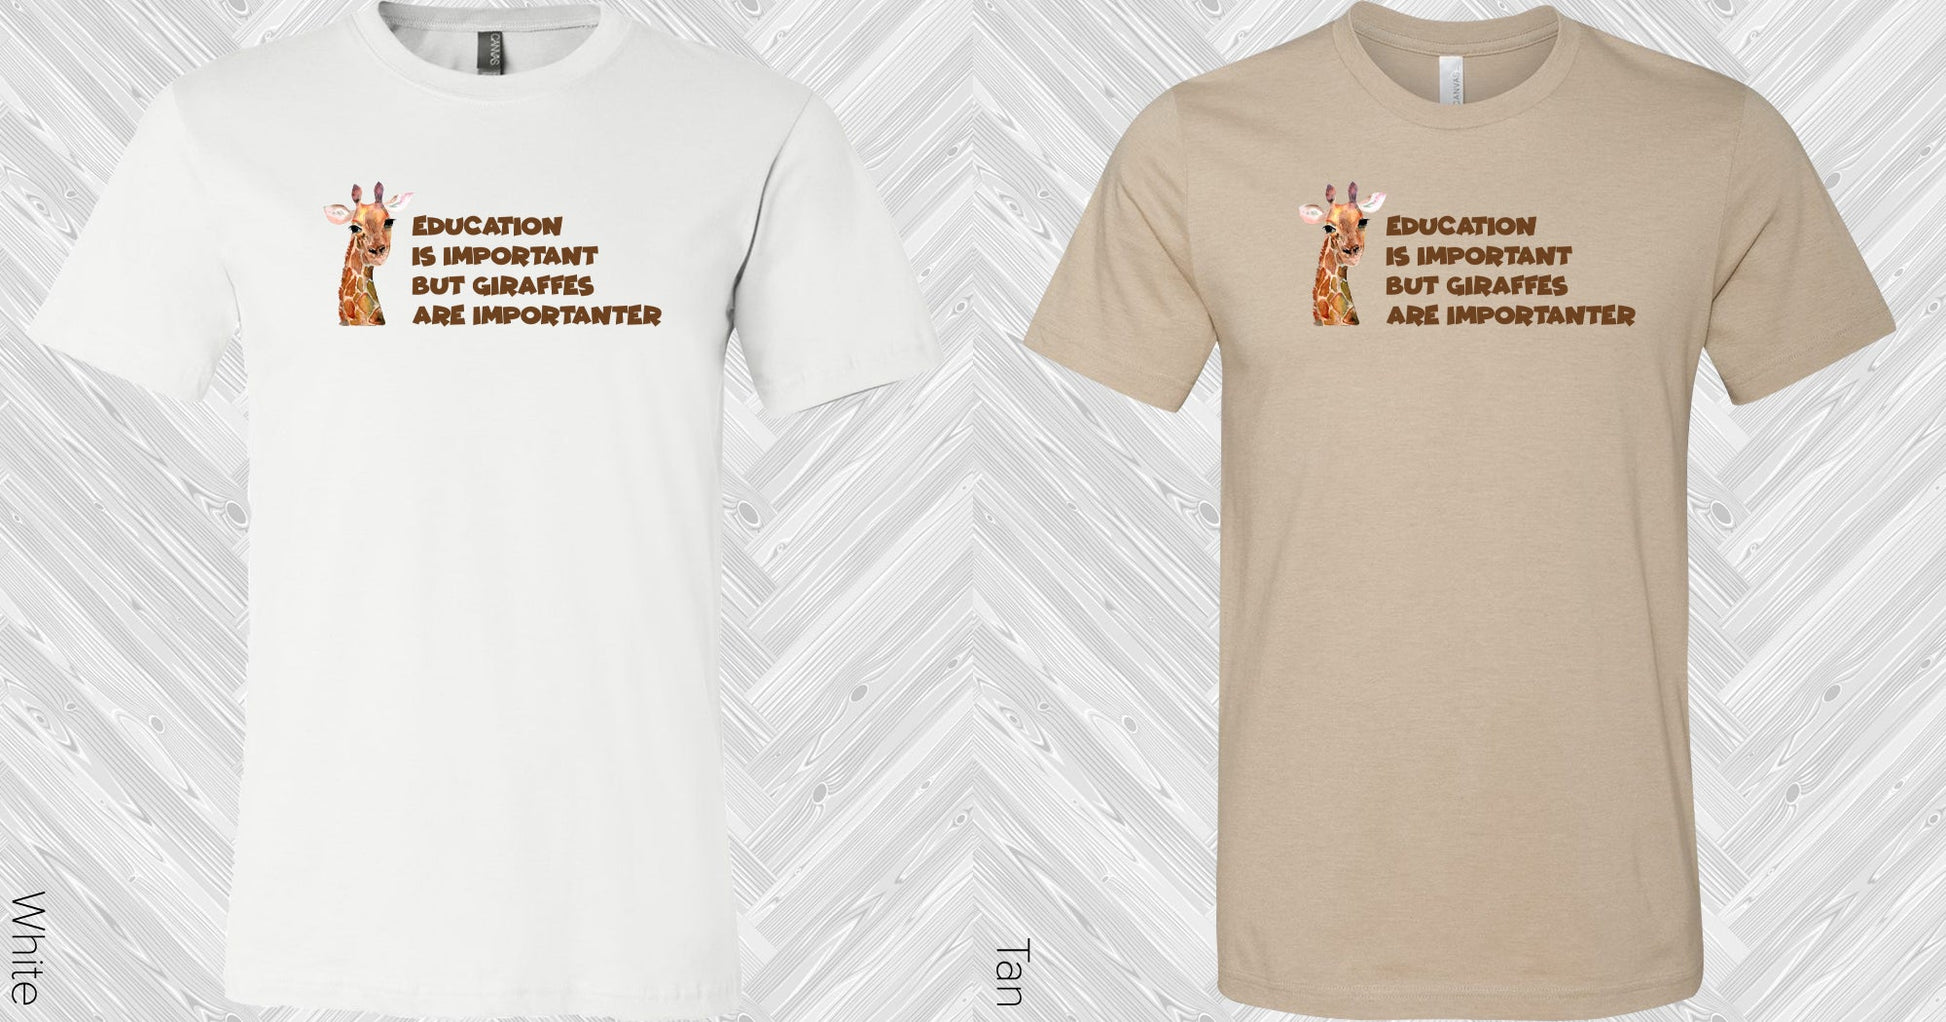 Education Is Important But Giraffes Are Importanter Graphic Tee Graphic Tee